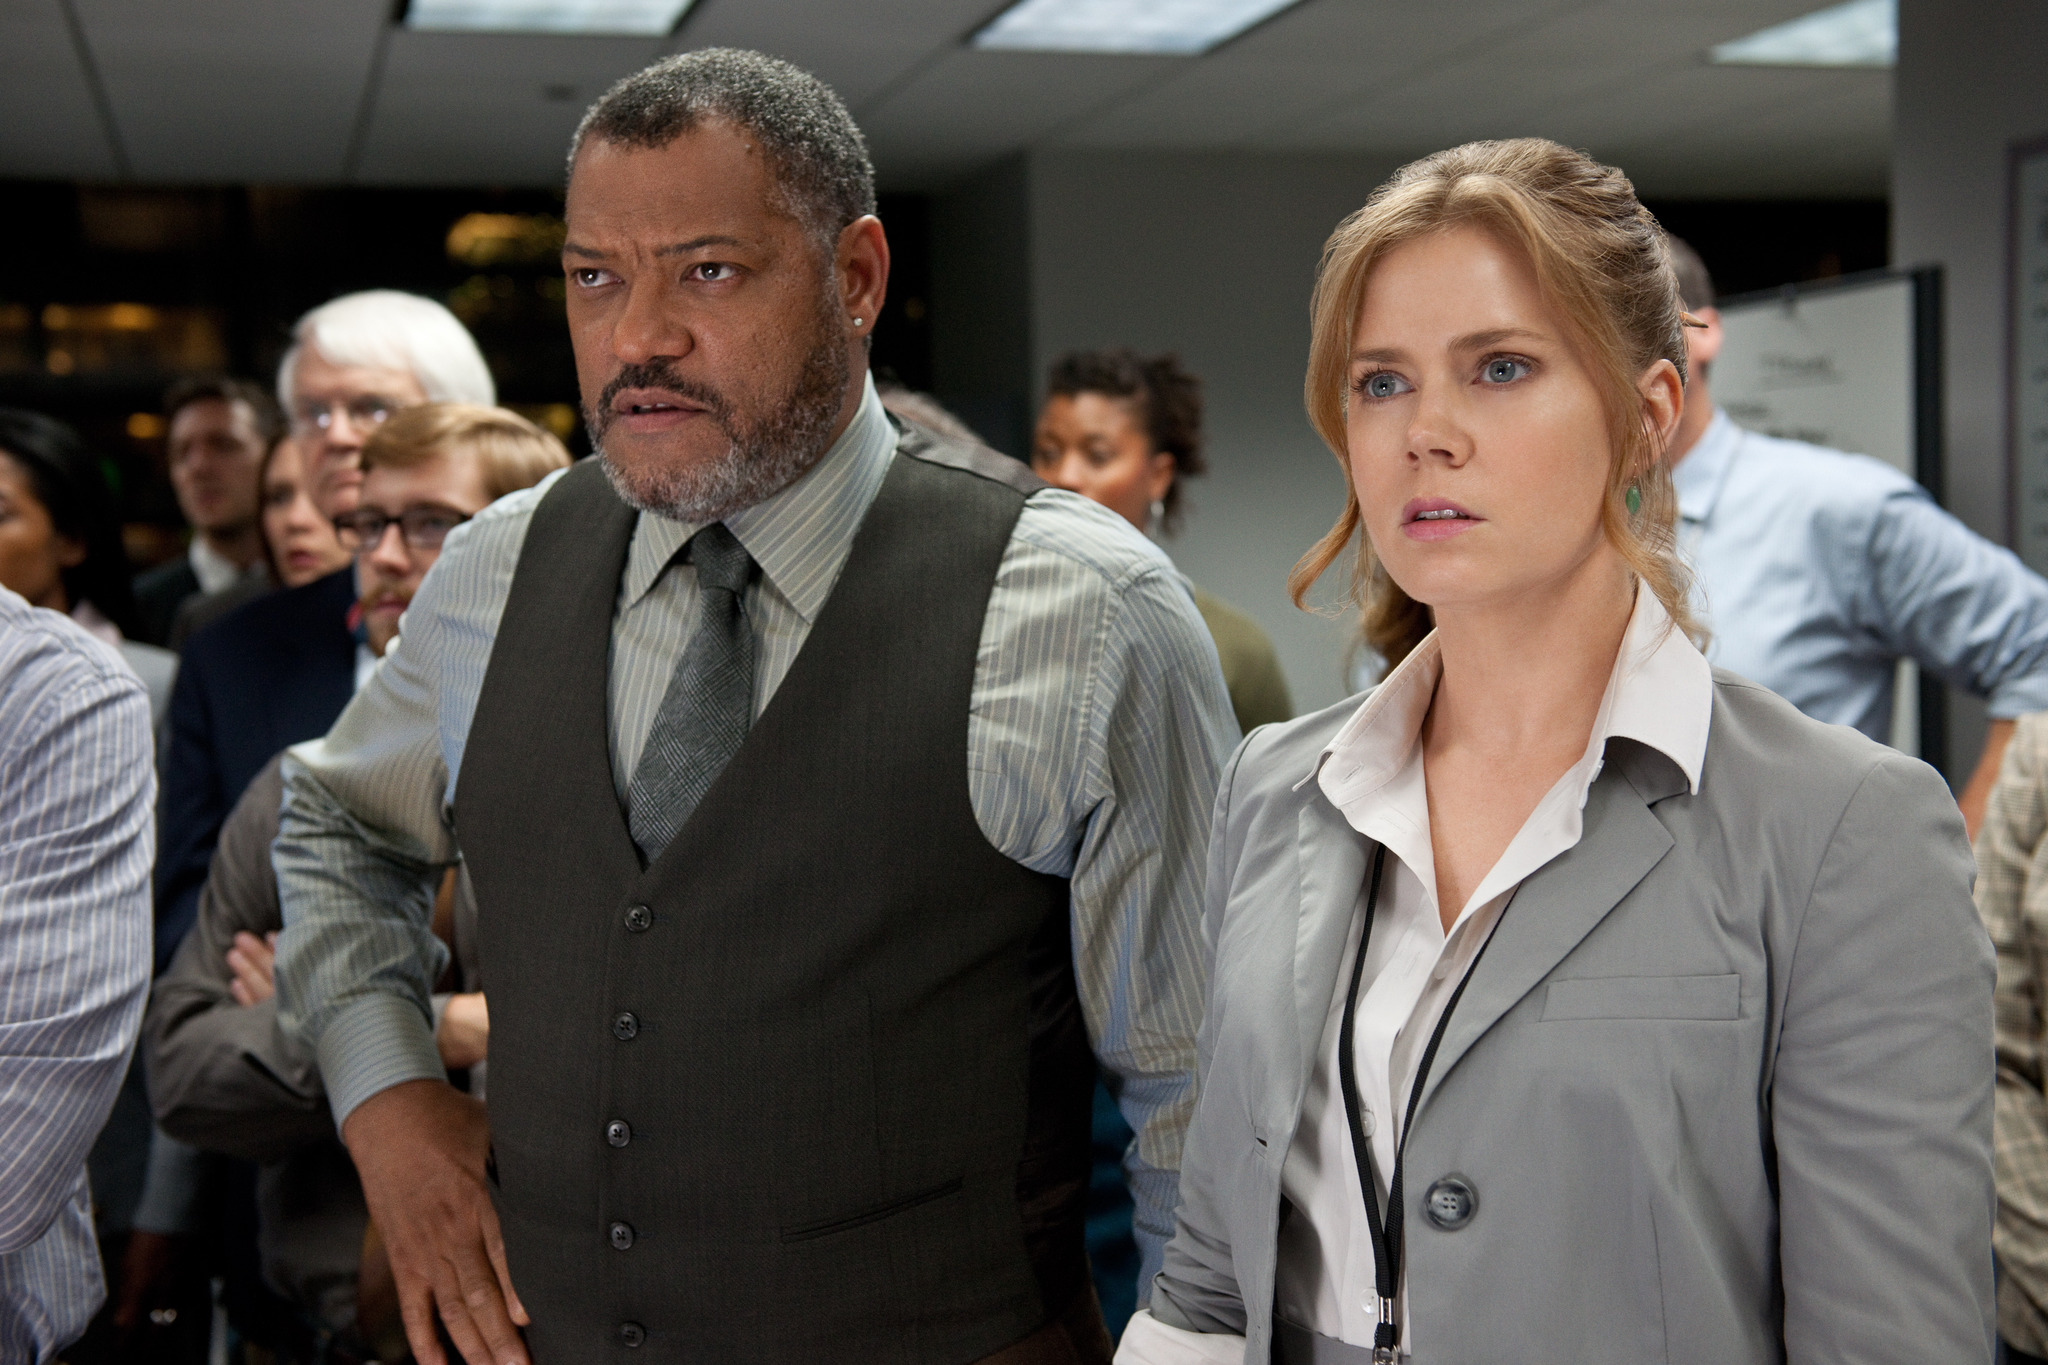 Still of Laurence Fishburne and Amy Adams in Zmogus is plieno (2013)